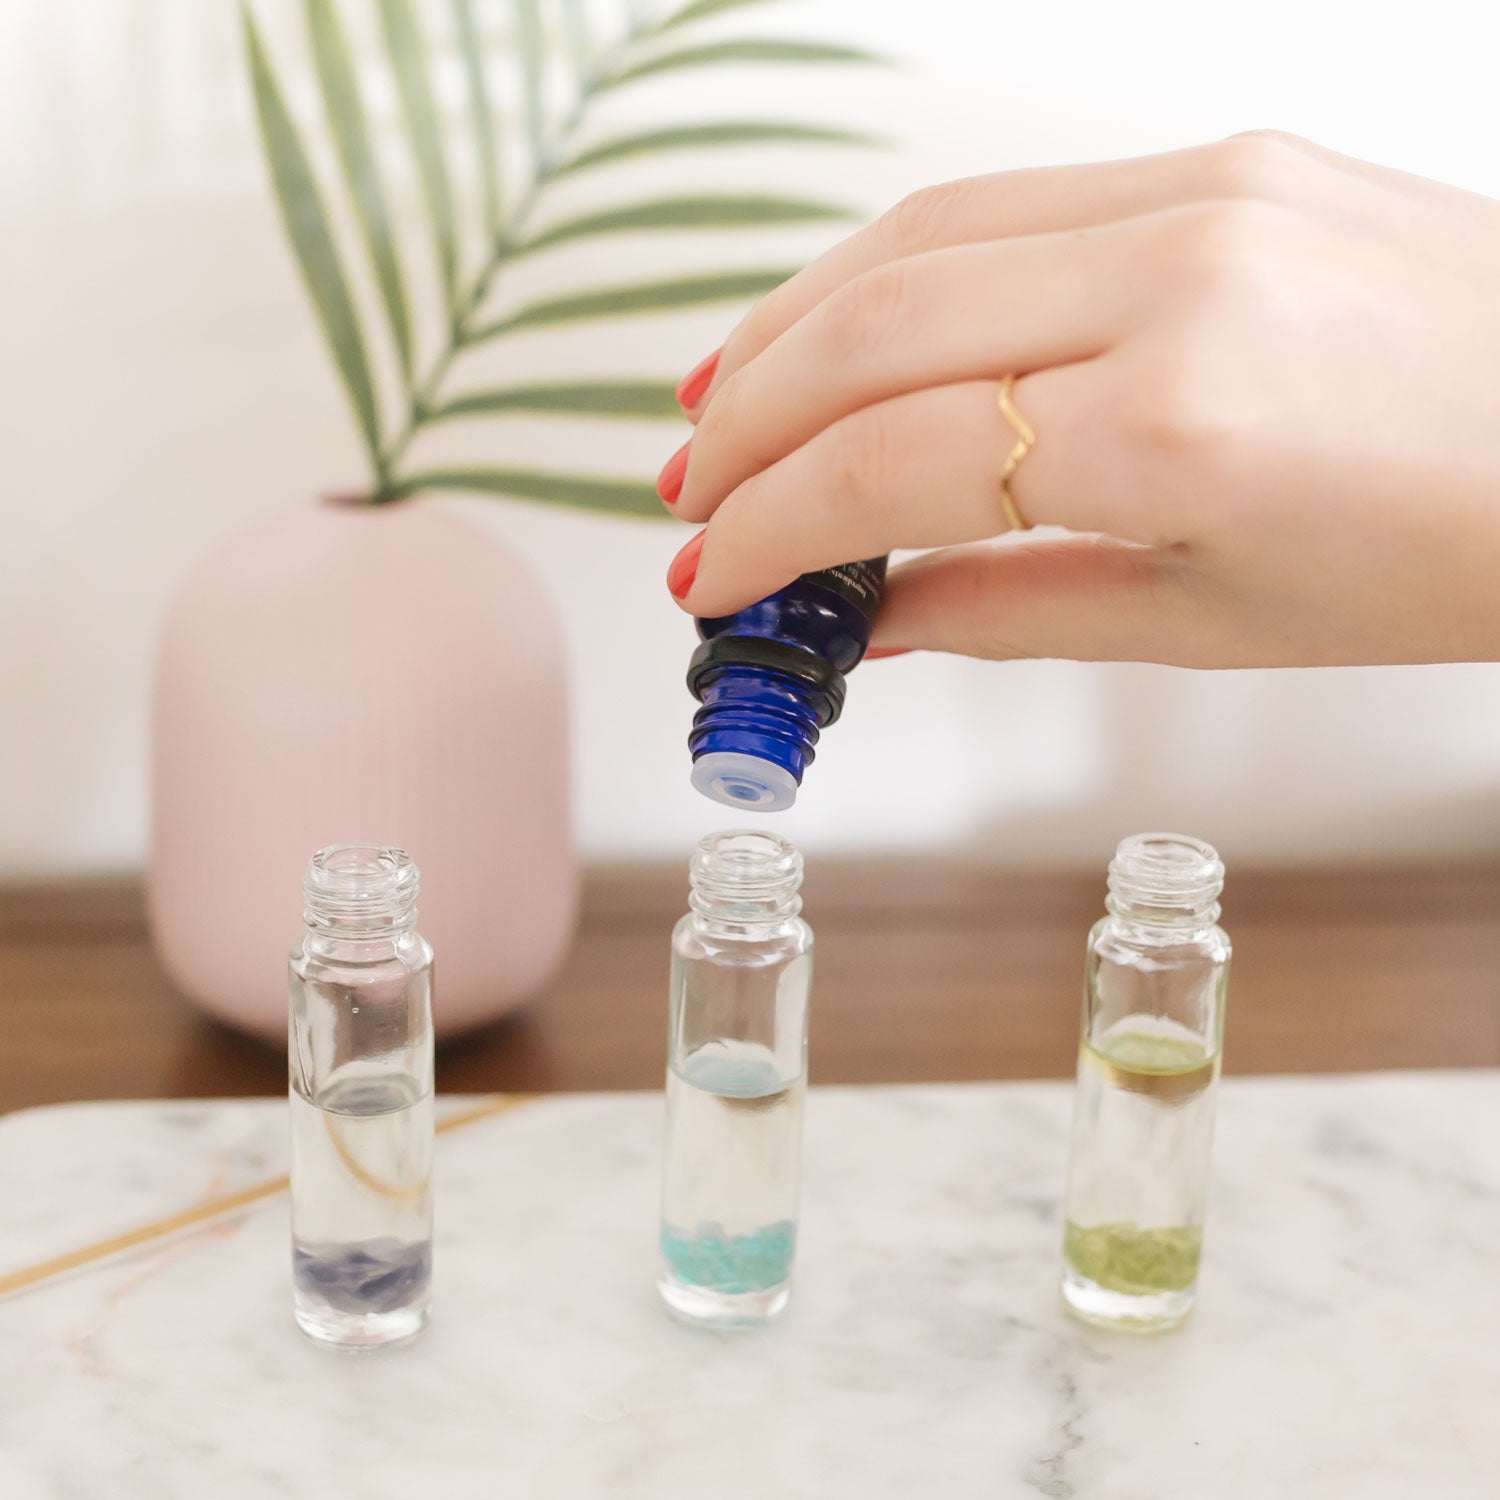 Make your own essential oil blends by Dani Barbe